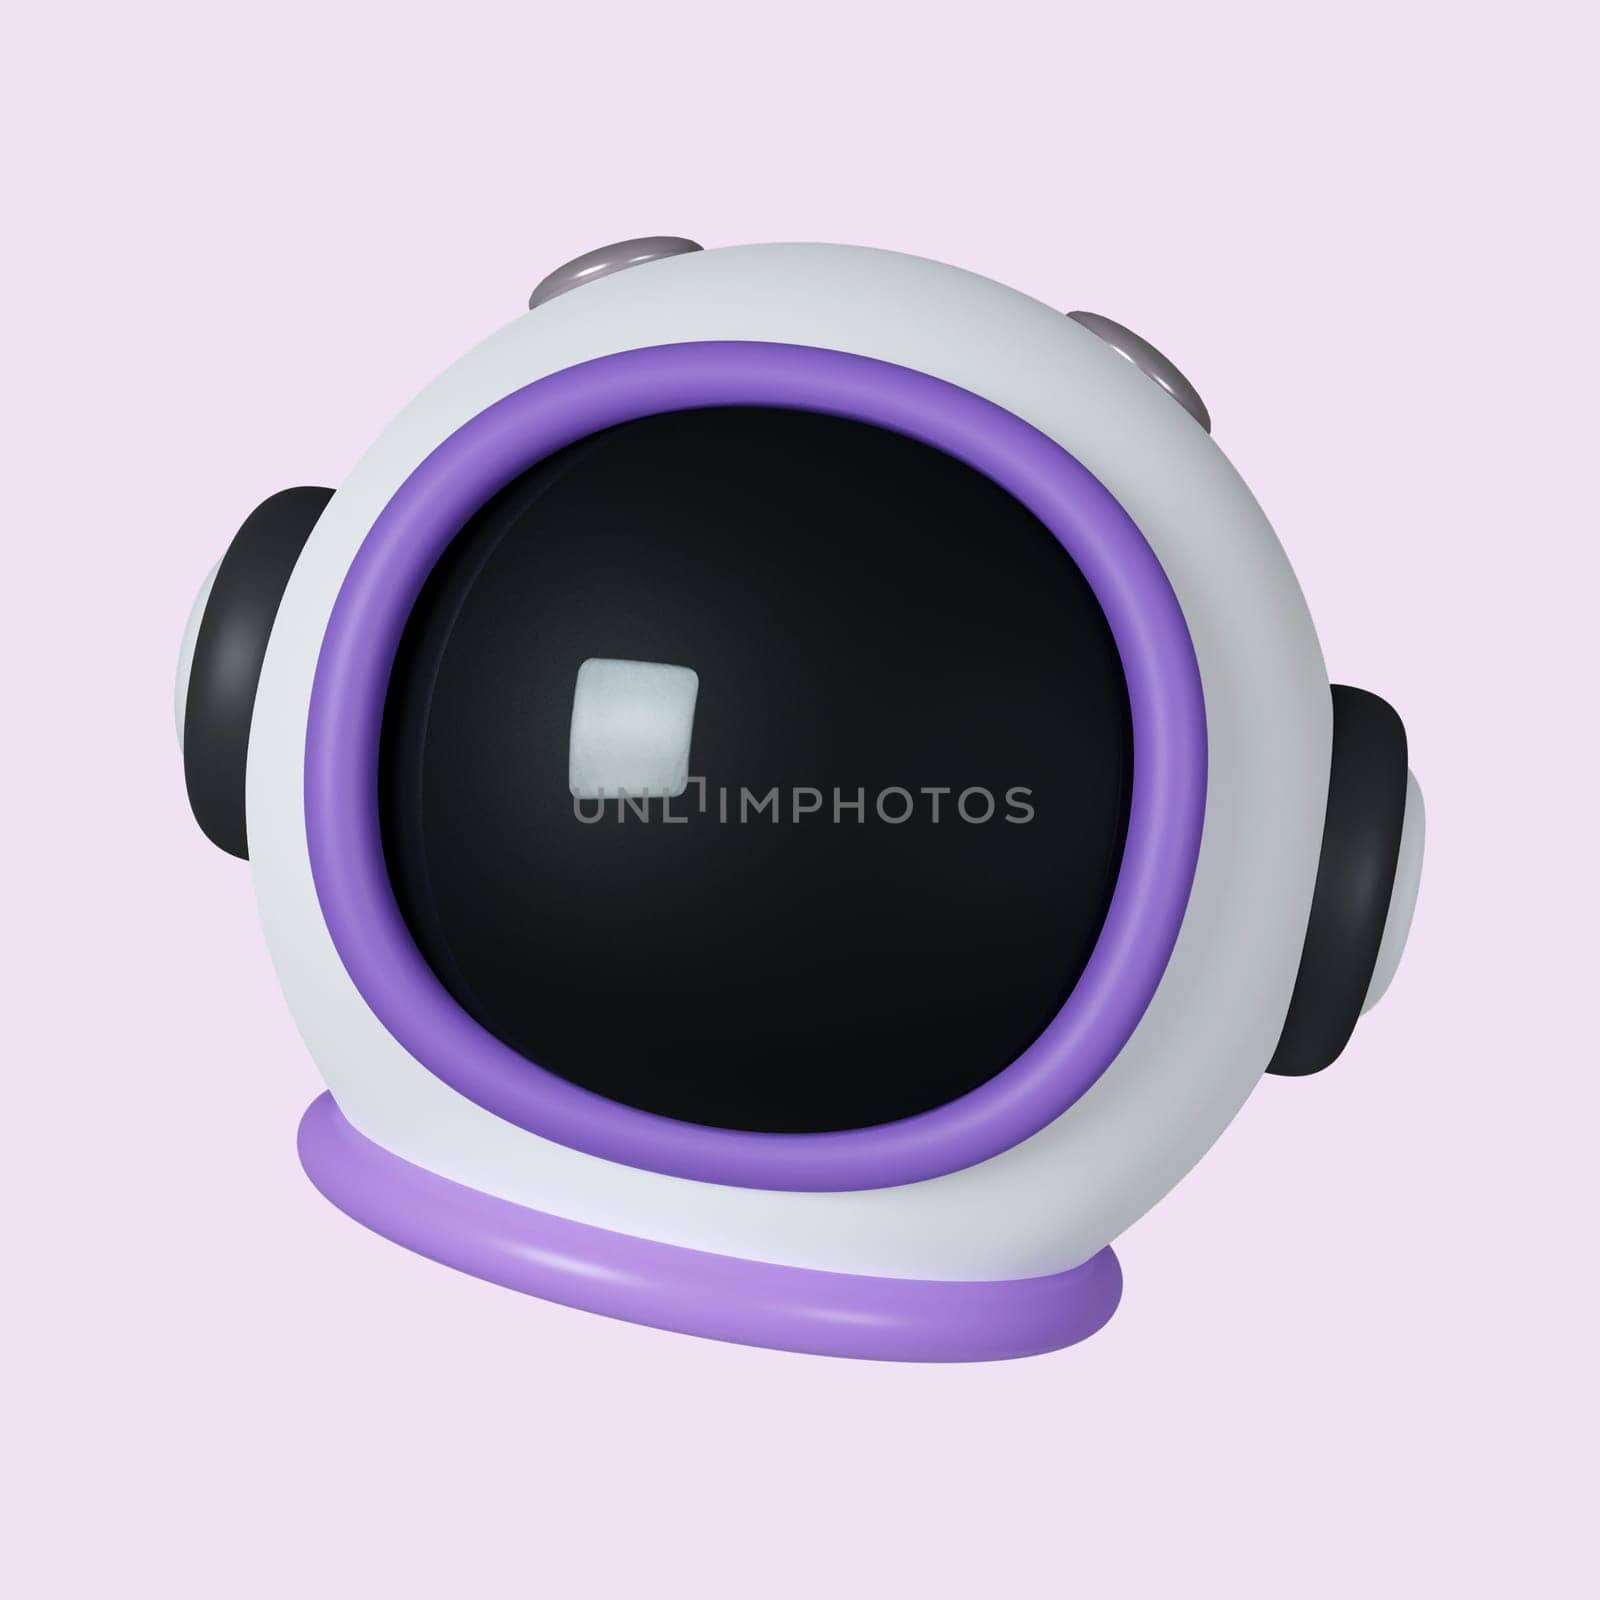 3d astronaut helmet. clear glass for space exploration and flight in cosmos. icon isolated on purple background. 3d rendering illustration. Clipping path. by meepiangraphic